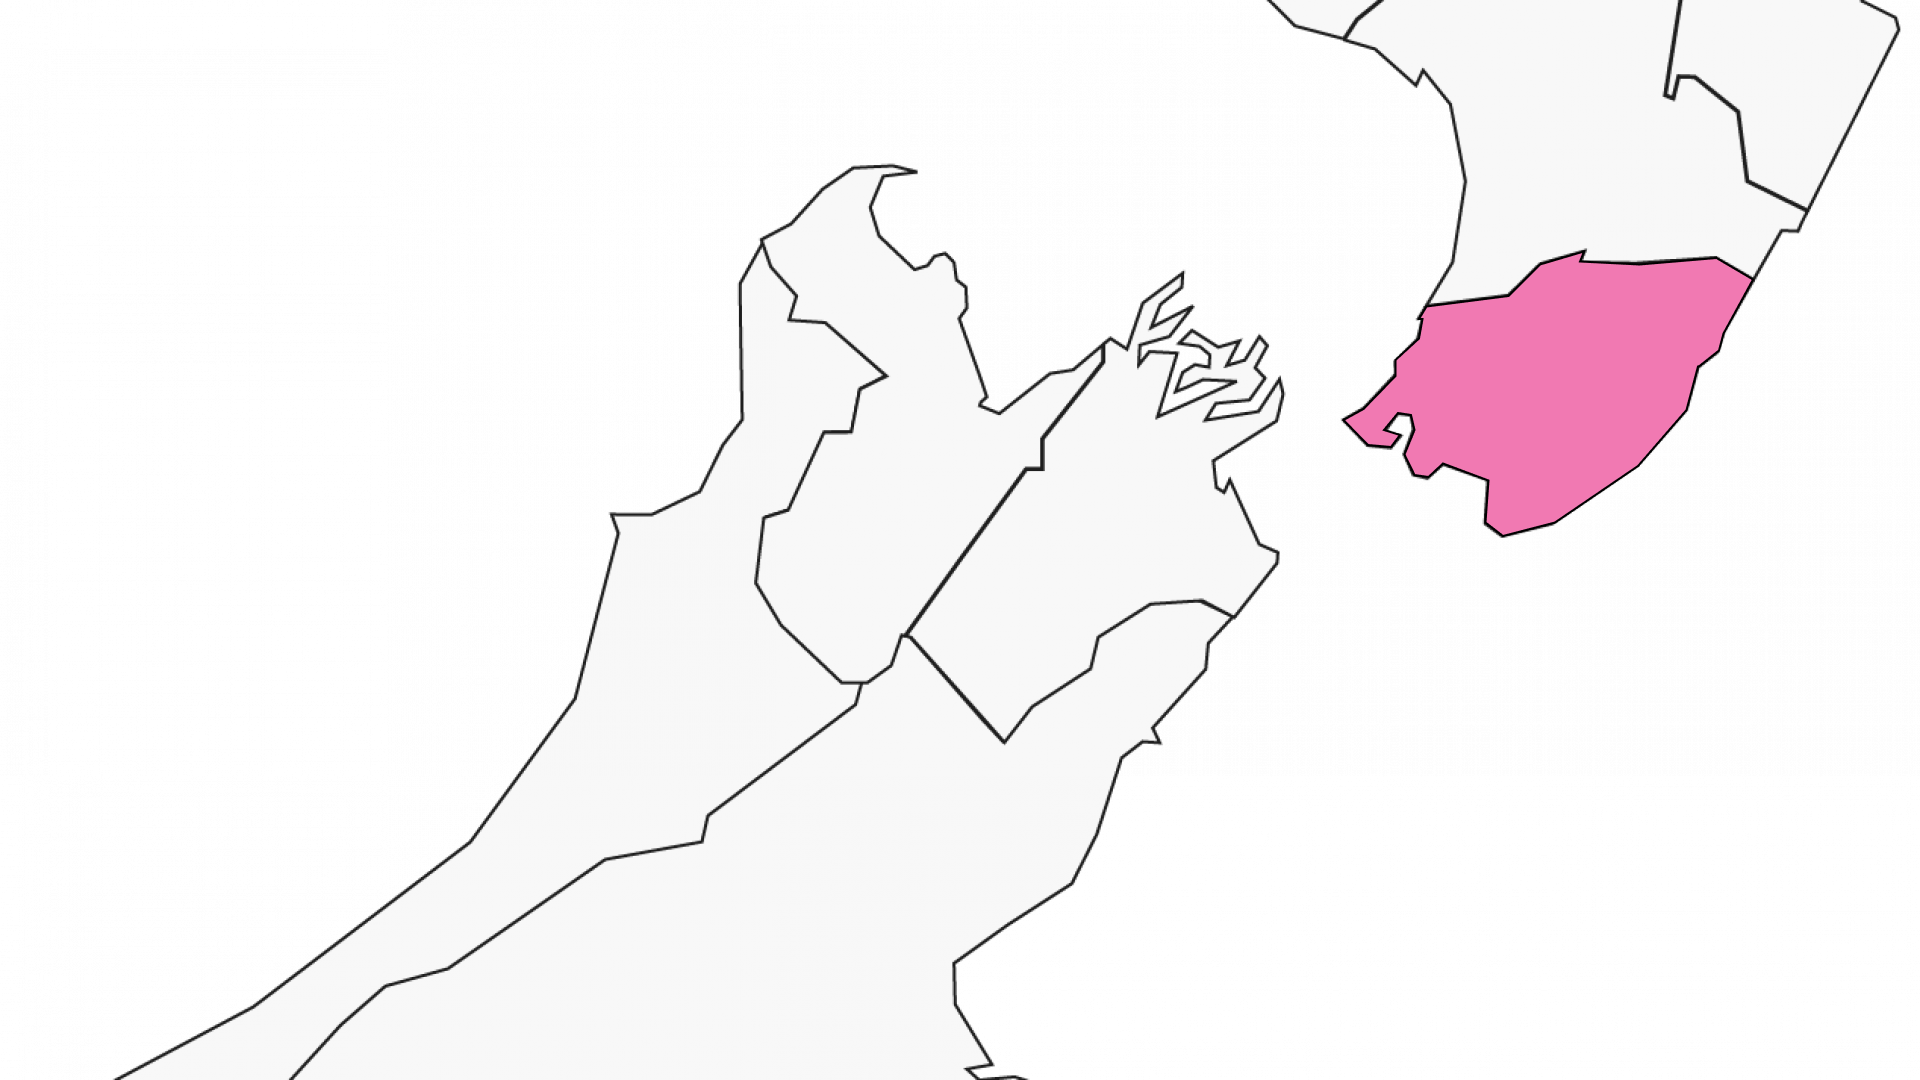 Map of North Island with Wellington highlighted in pink